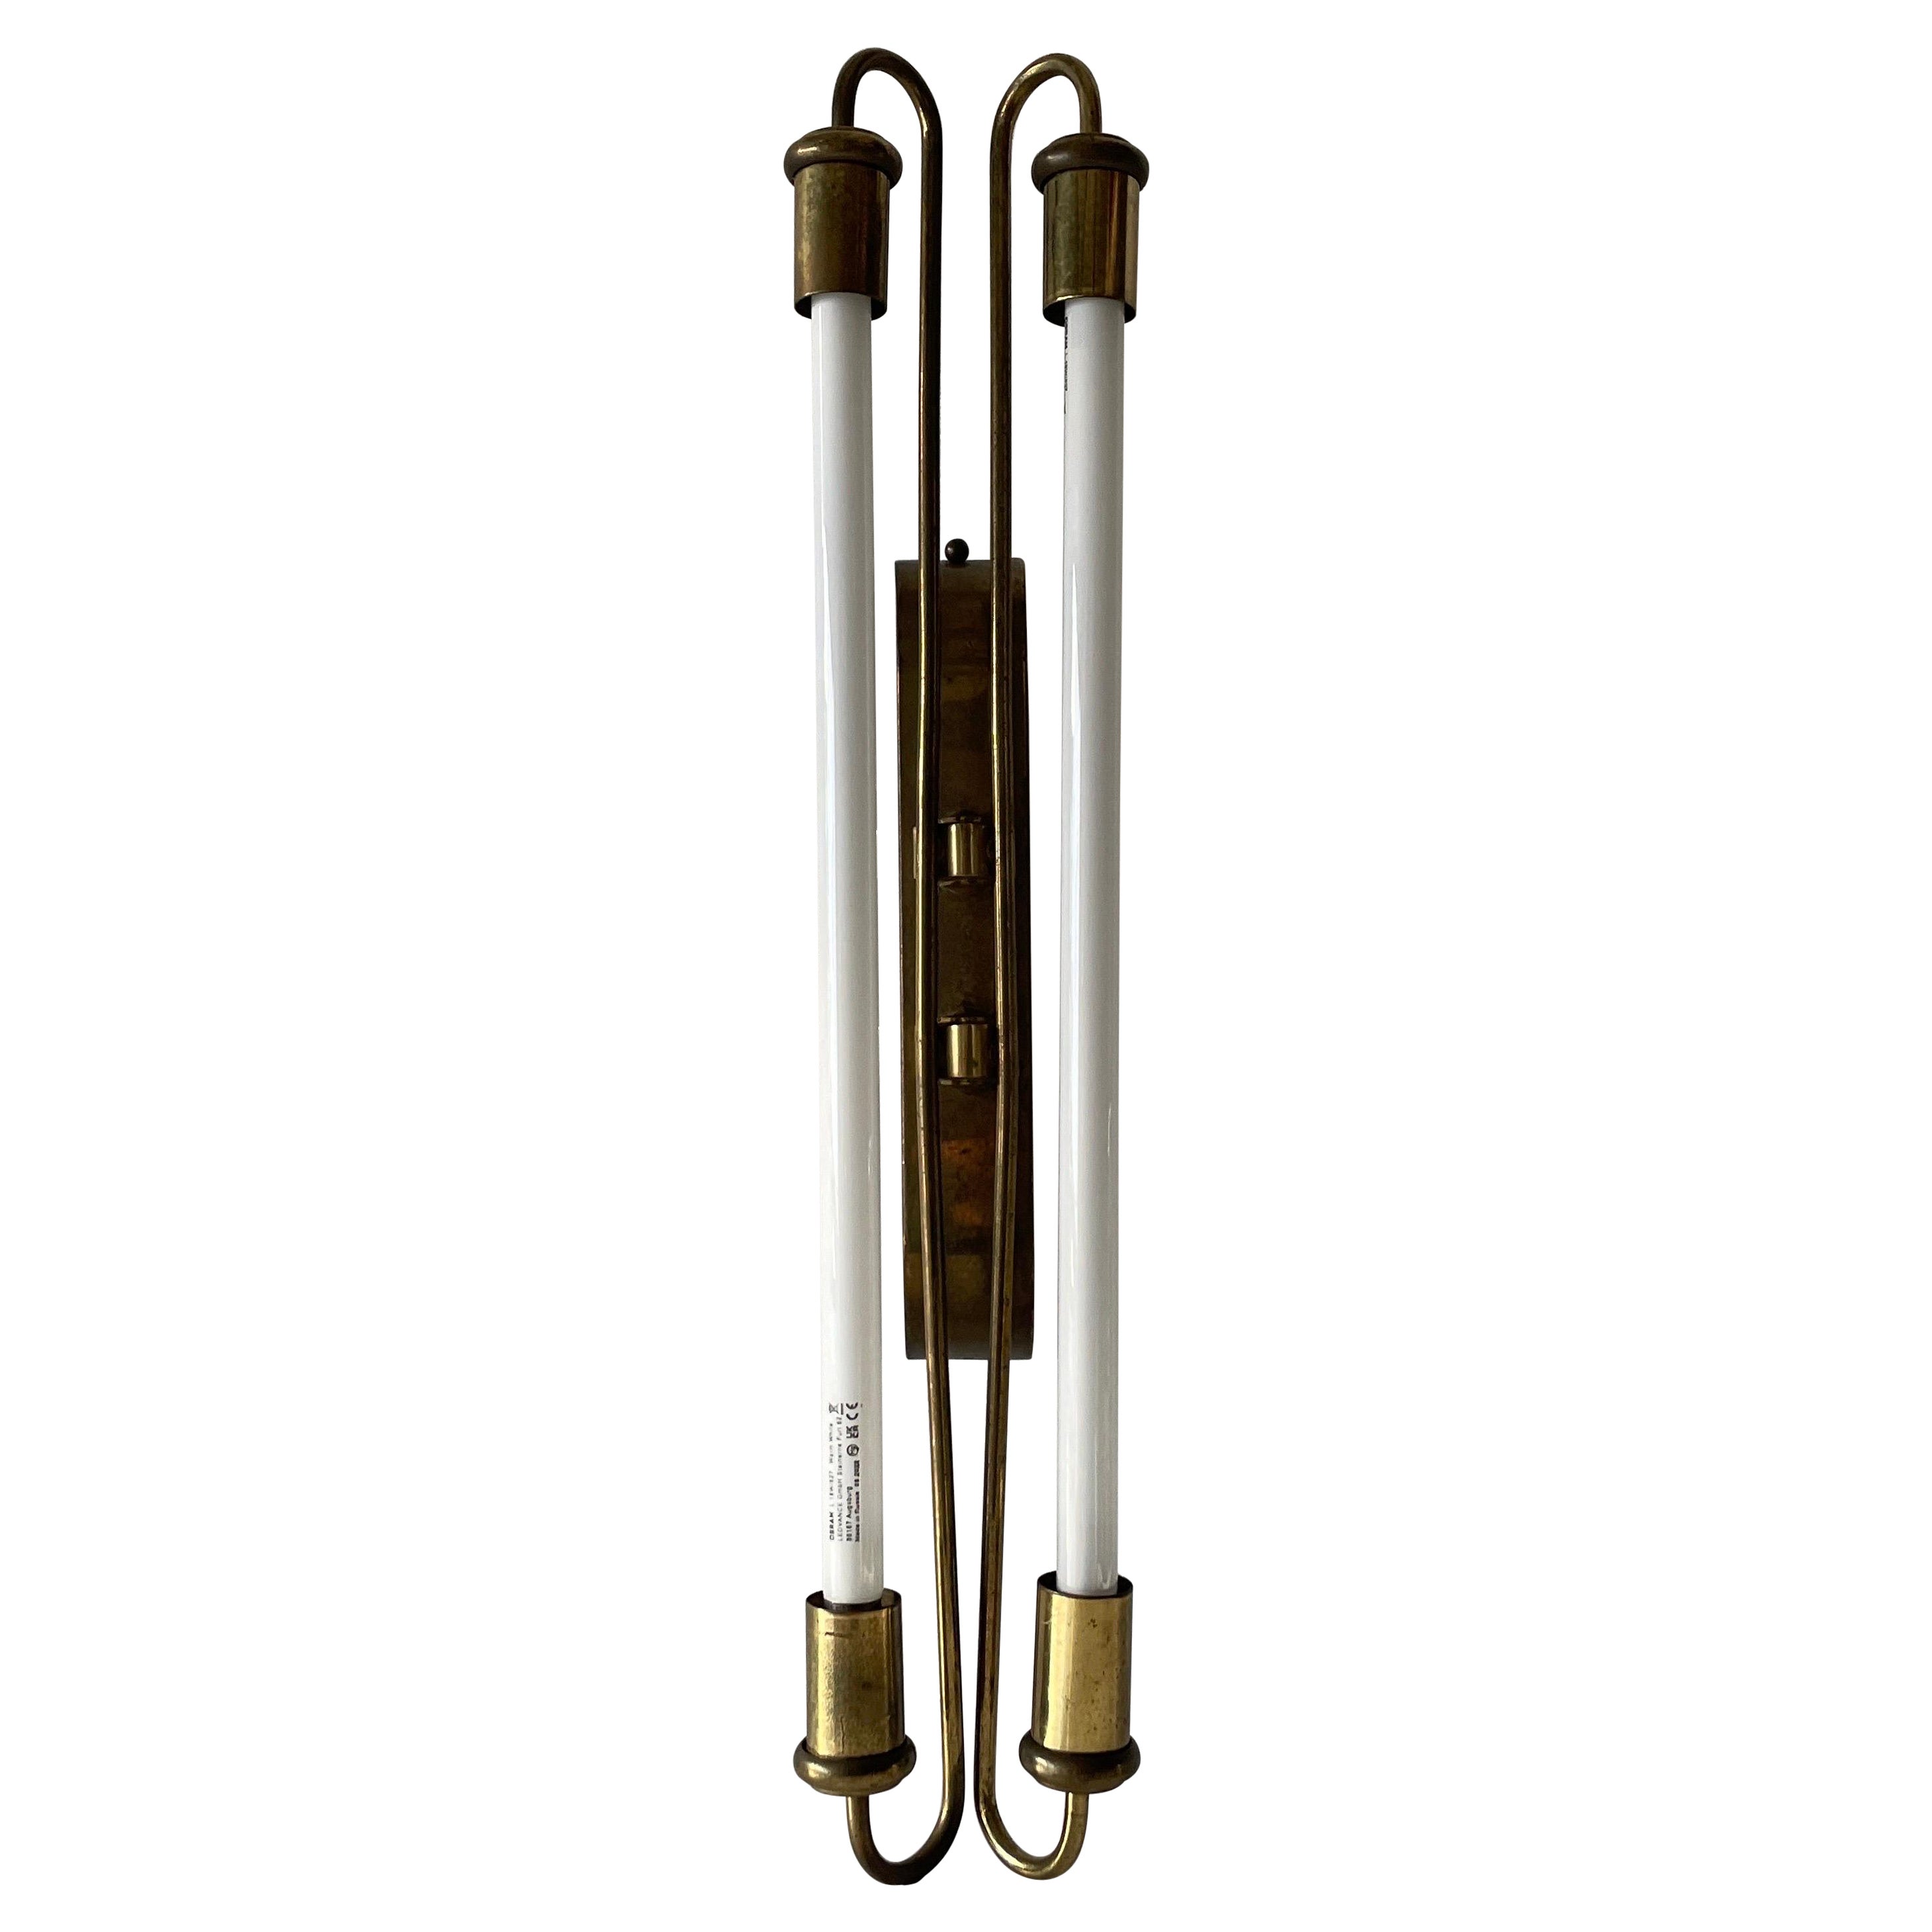 Art Deco Brass Industrial Cinema Sconce with Fluorescent Tubes, 1930s, Germany